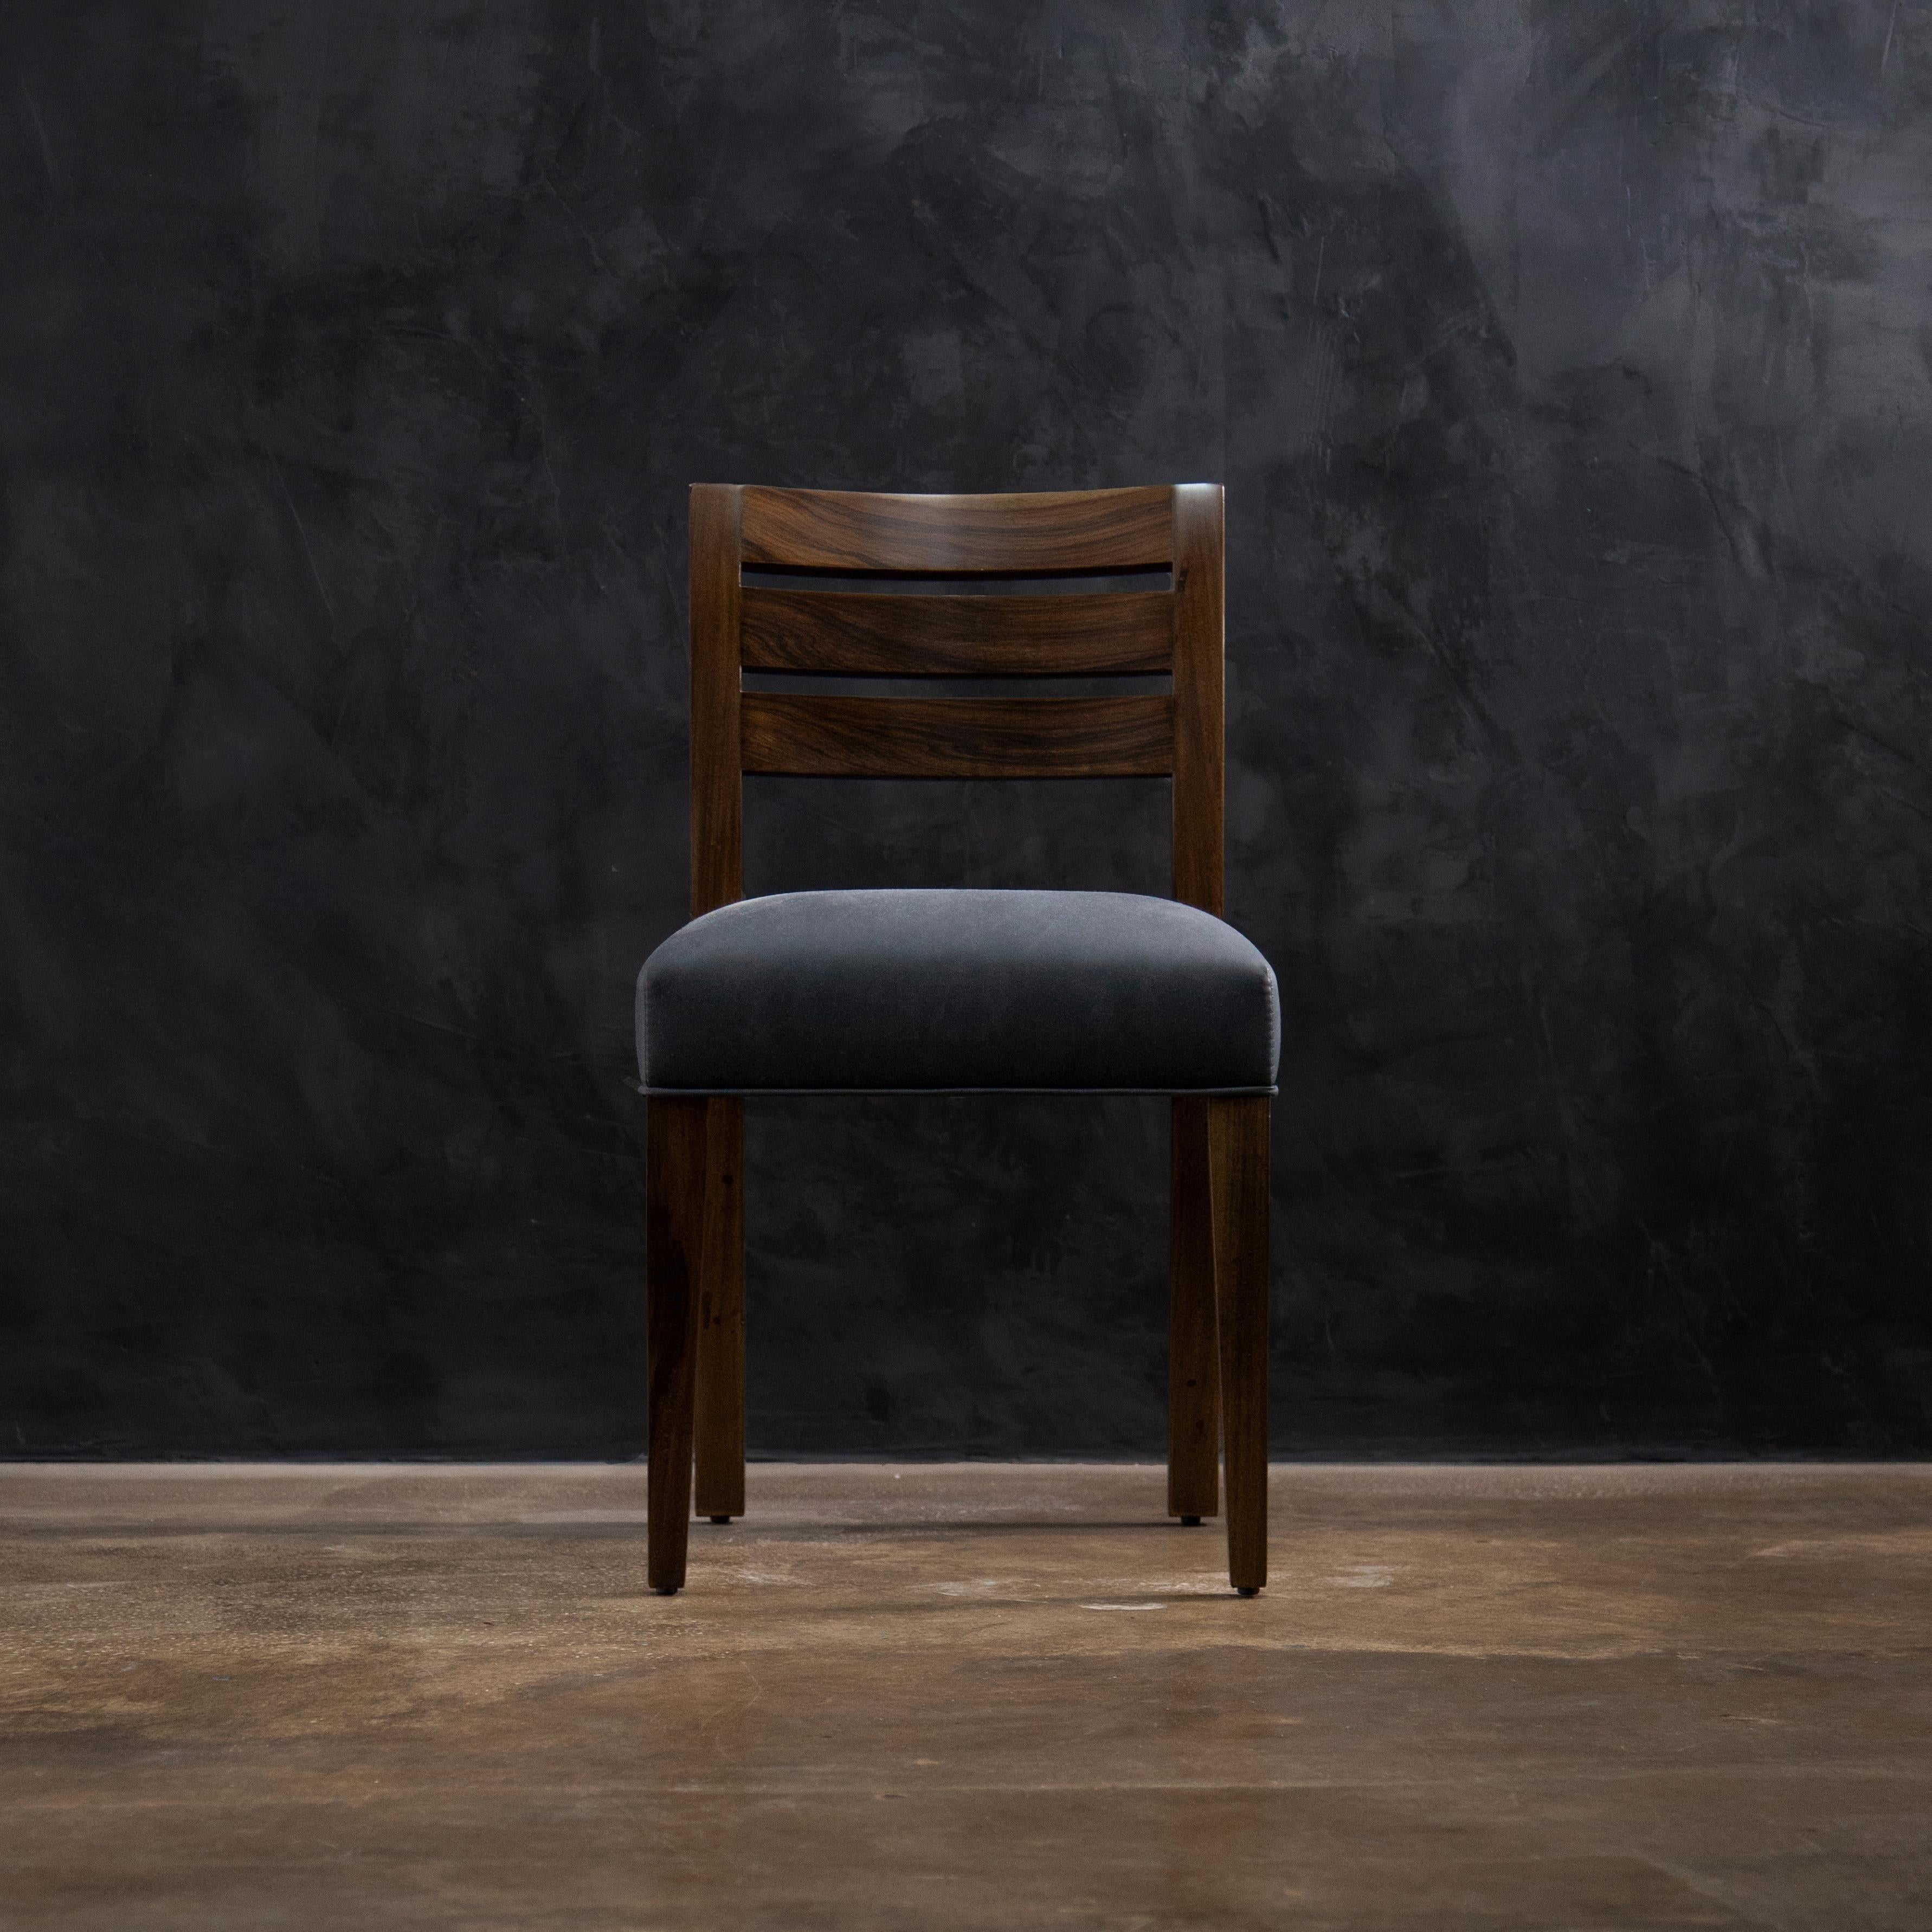 The Renzo chair features a solid Argentine Rosewood frame with a slatted back and a gently curving back leg. It is available in hundreds of different leathers that we can help source, or in your choice of COM/COL (discount applies).  Available in